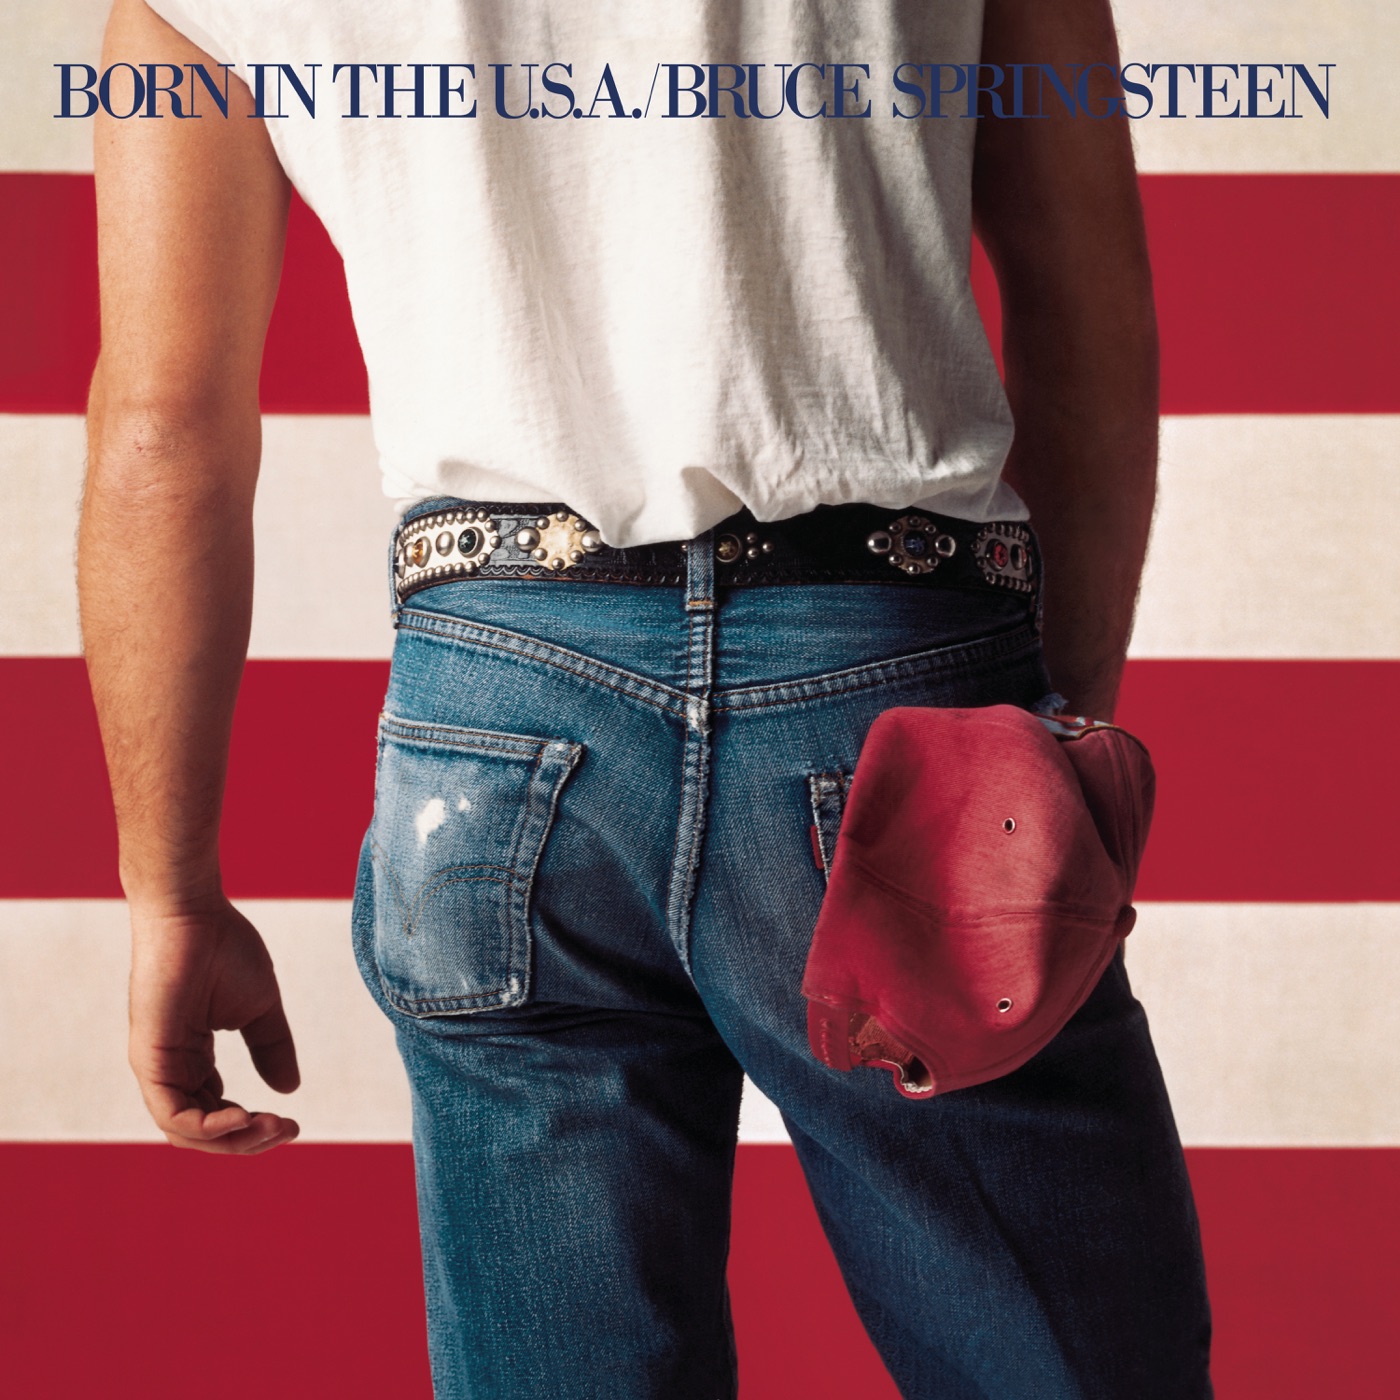 Born In the U.S.A by Bruce Springsteen